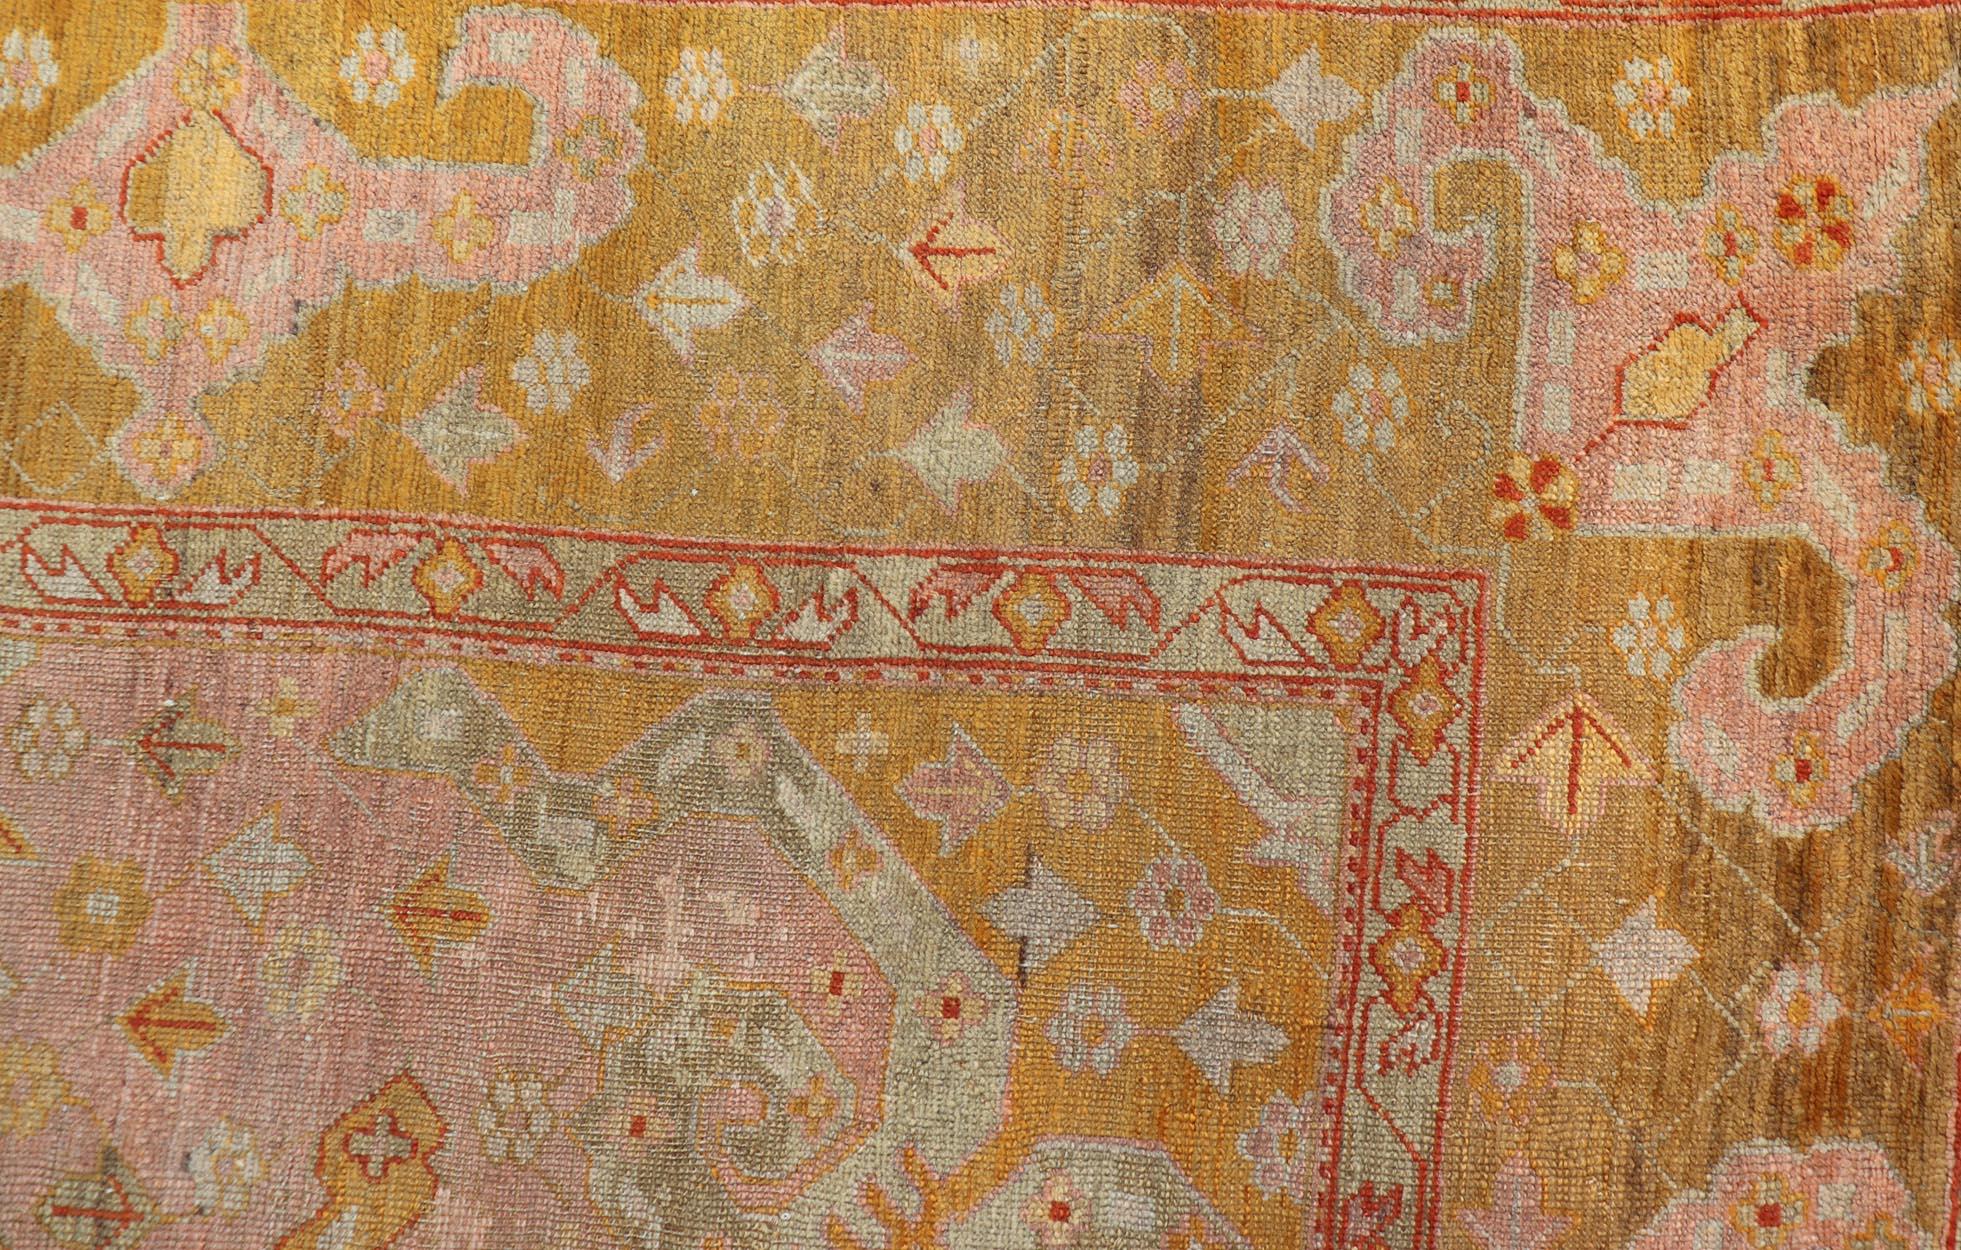 Squared Shape Antique Oushak Rug in Green, Marigold, Cream and Pink Color  In Good Condition For Sale In Atlanta, GA